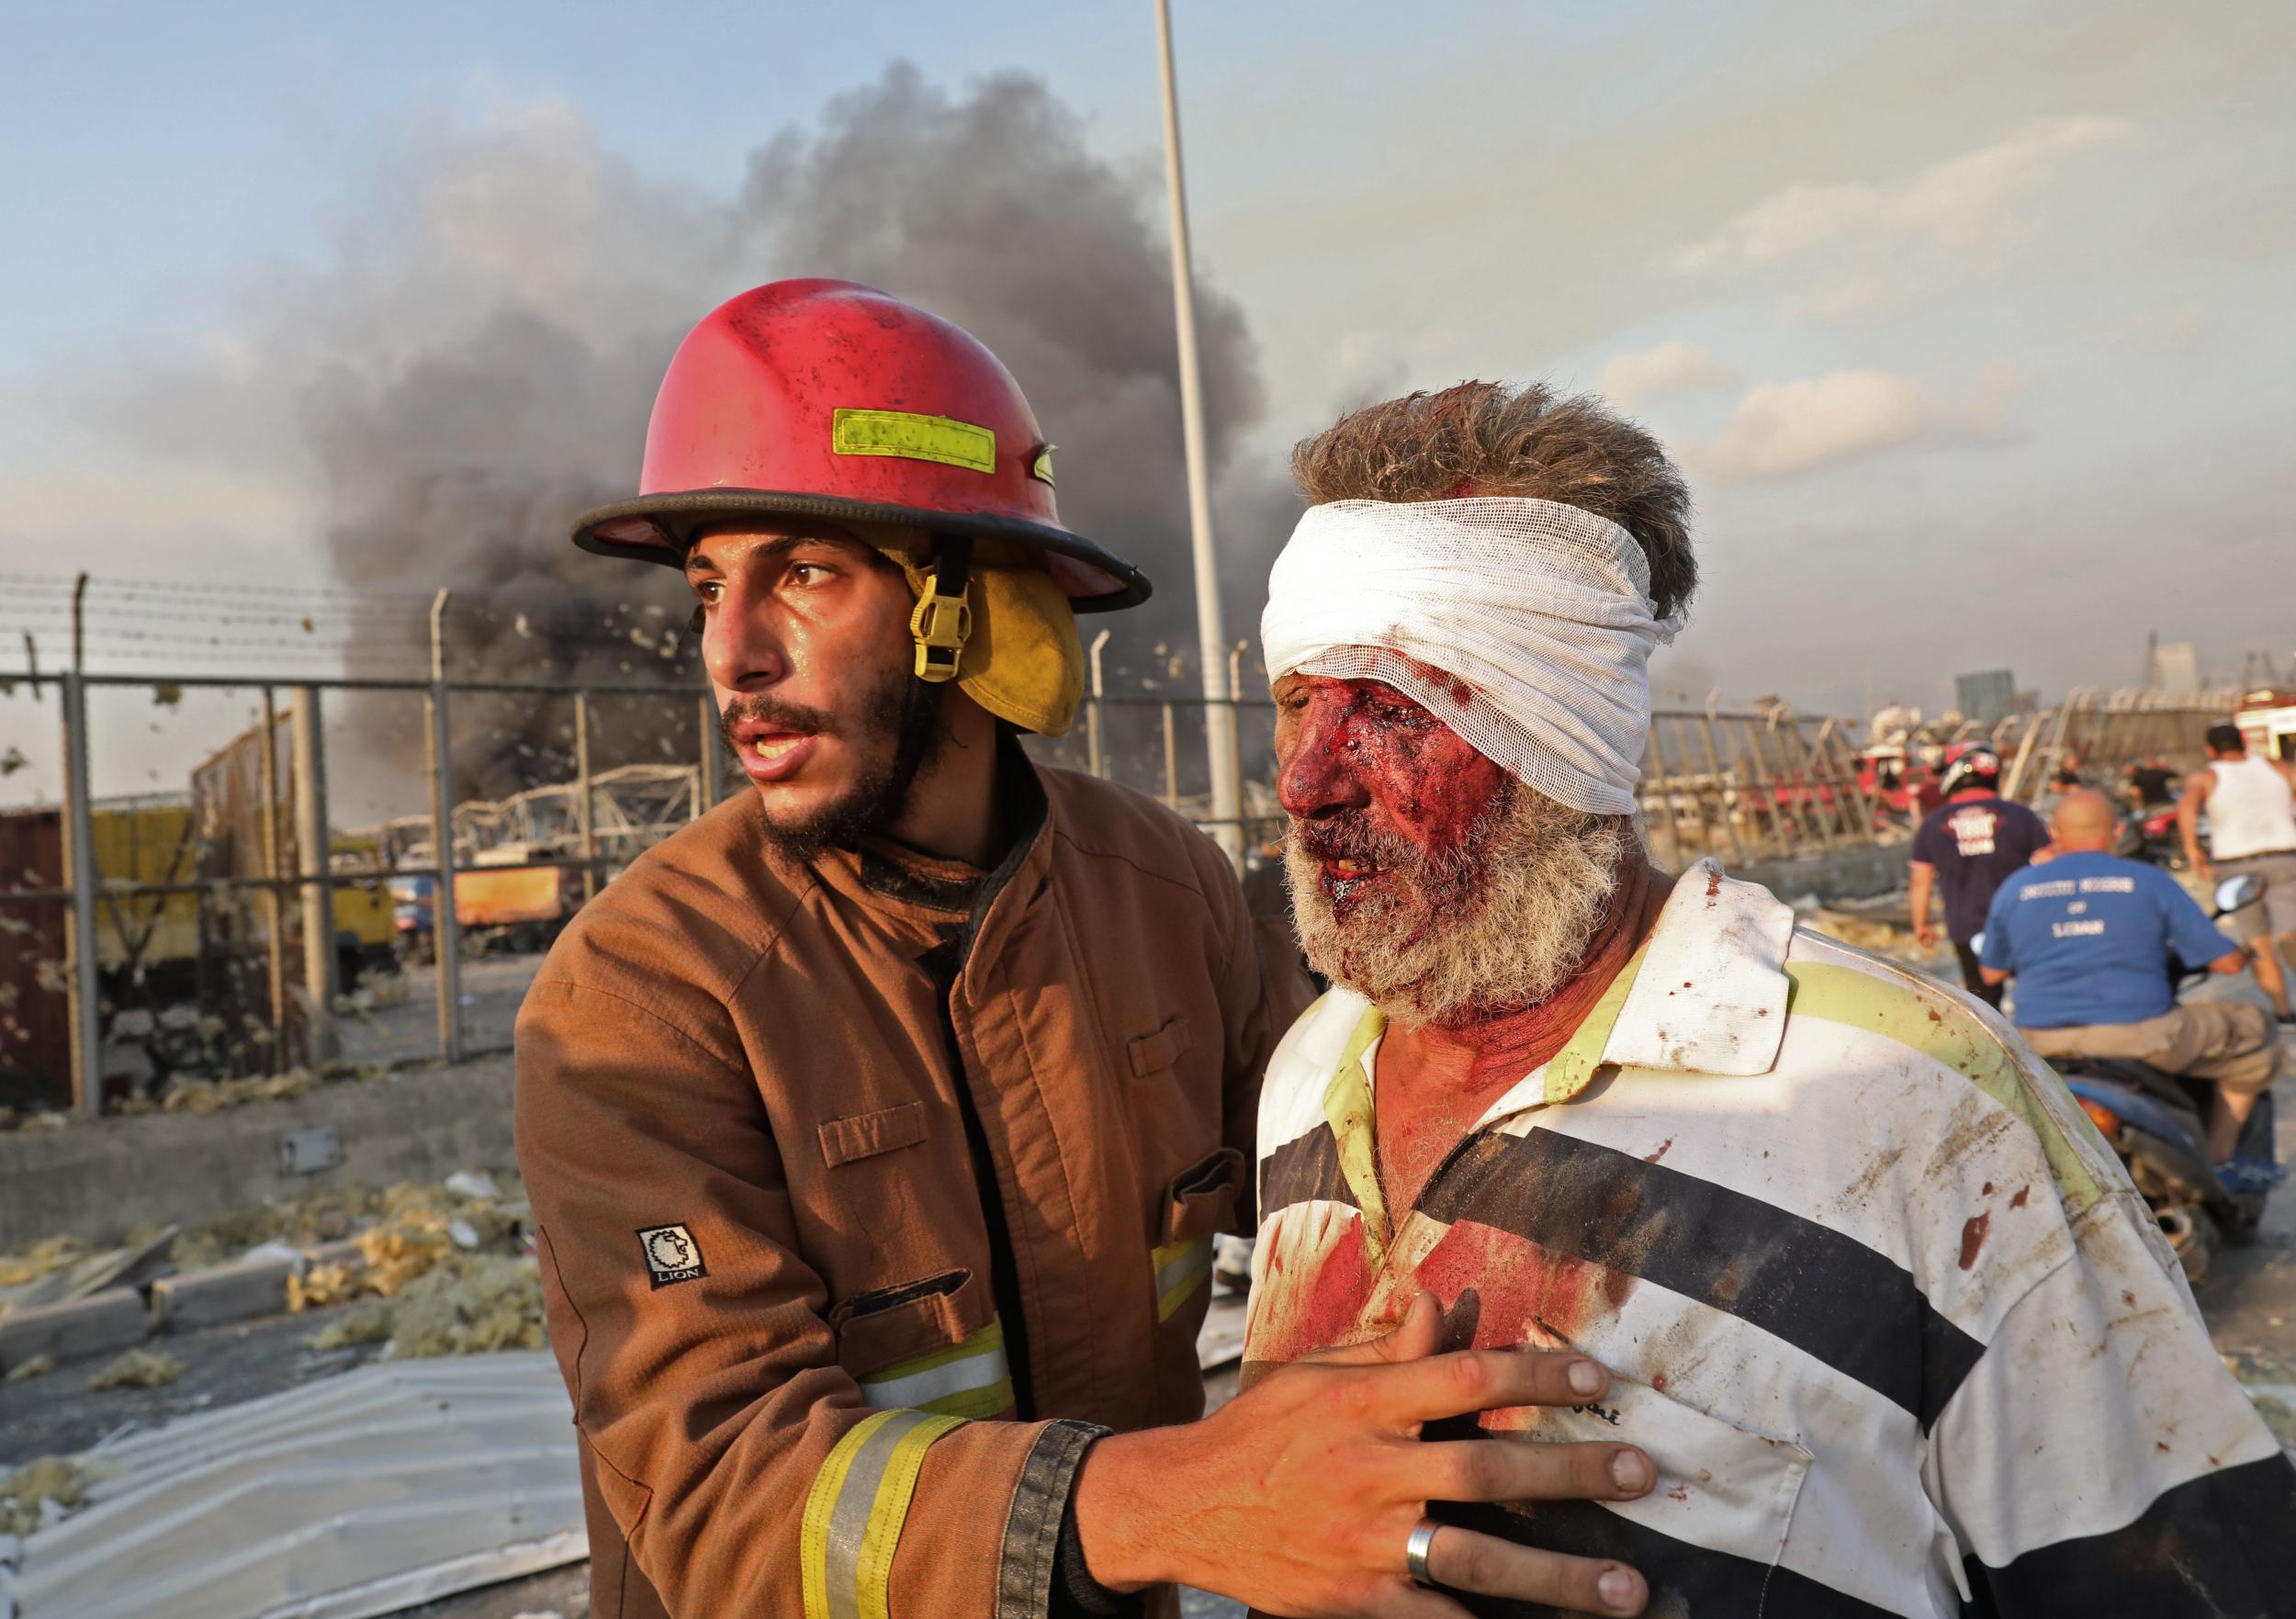 A wounded man is helped by a firefighter near the scene of the explosion in Beirut on 4 August